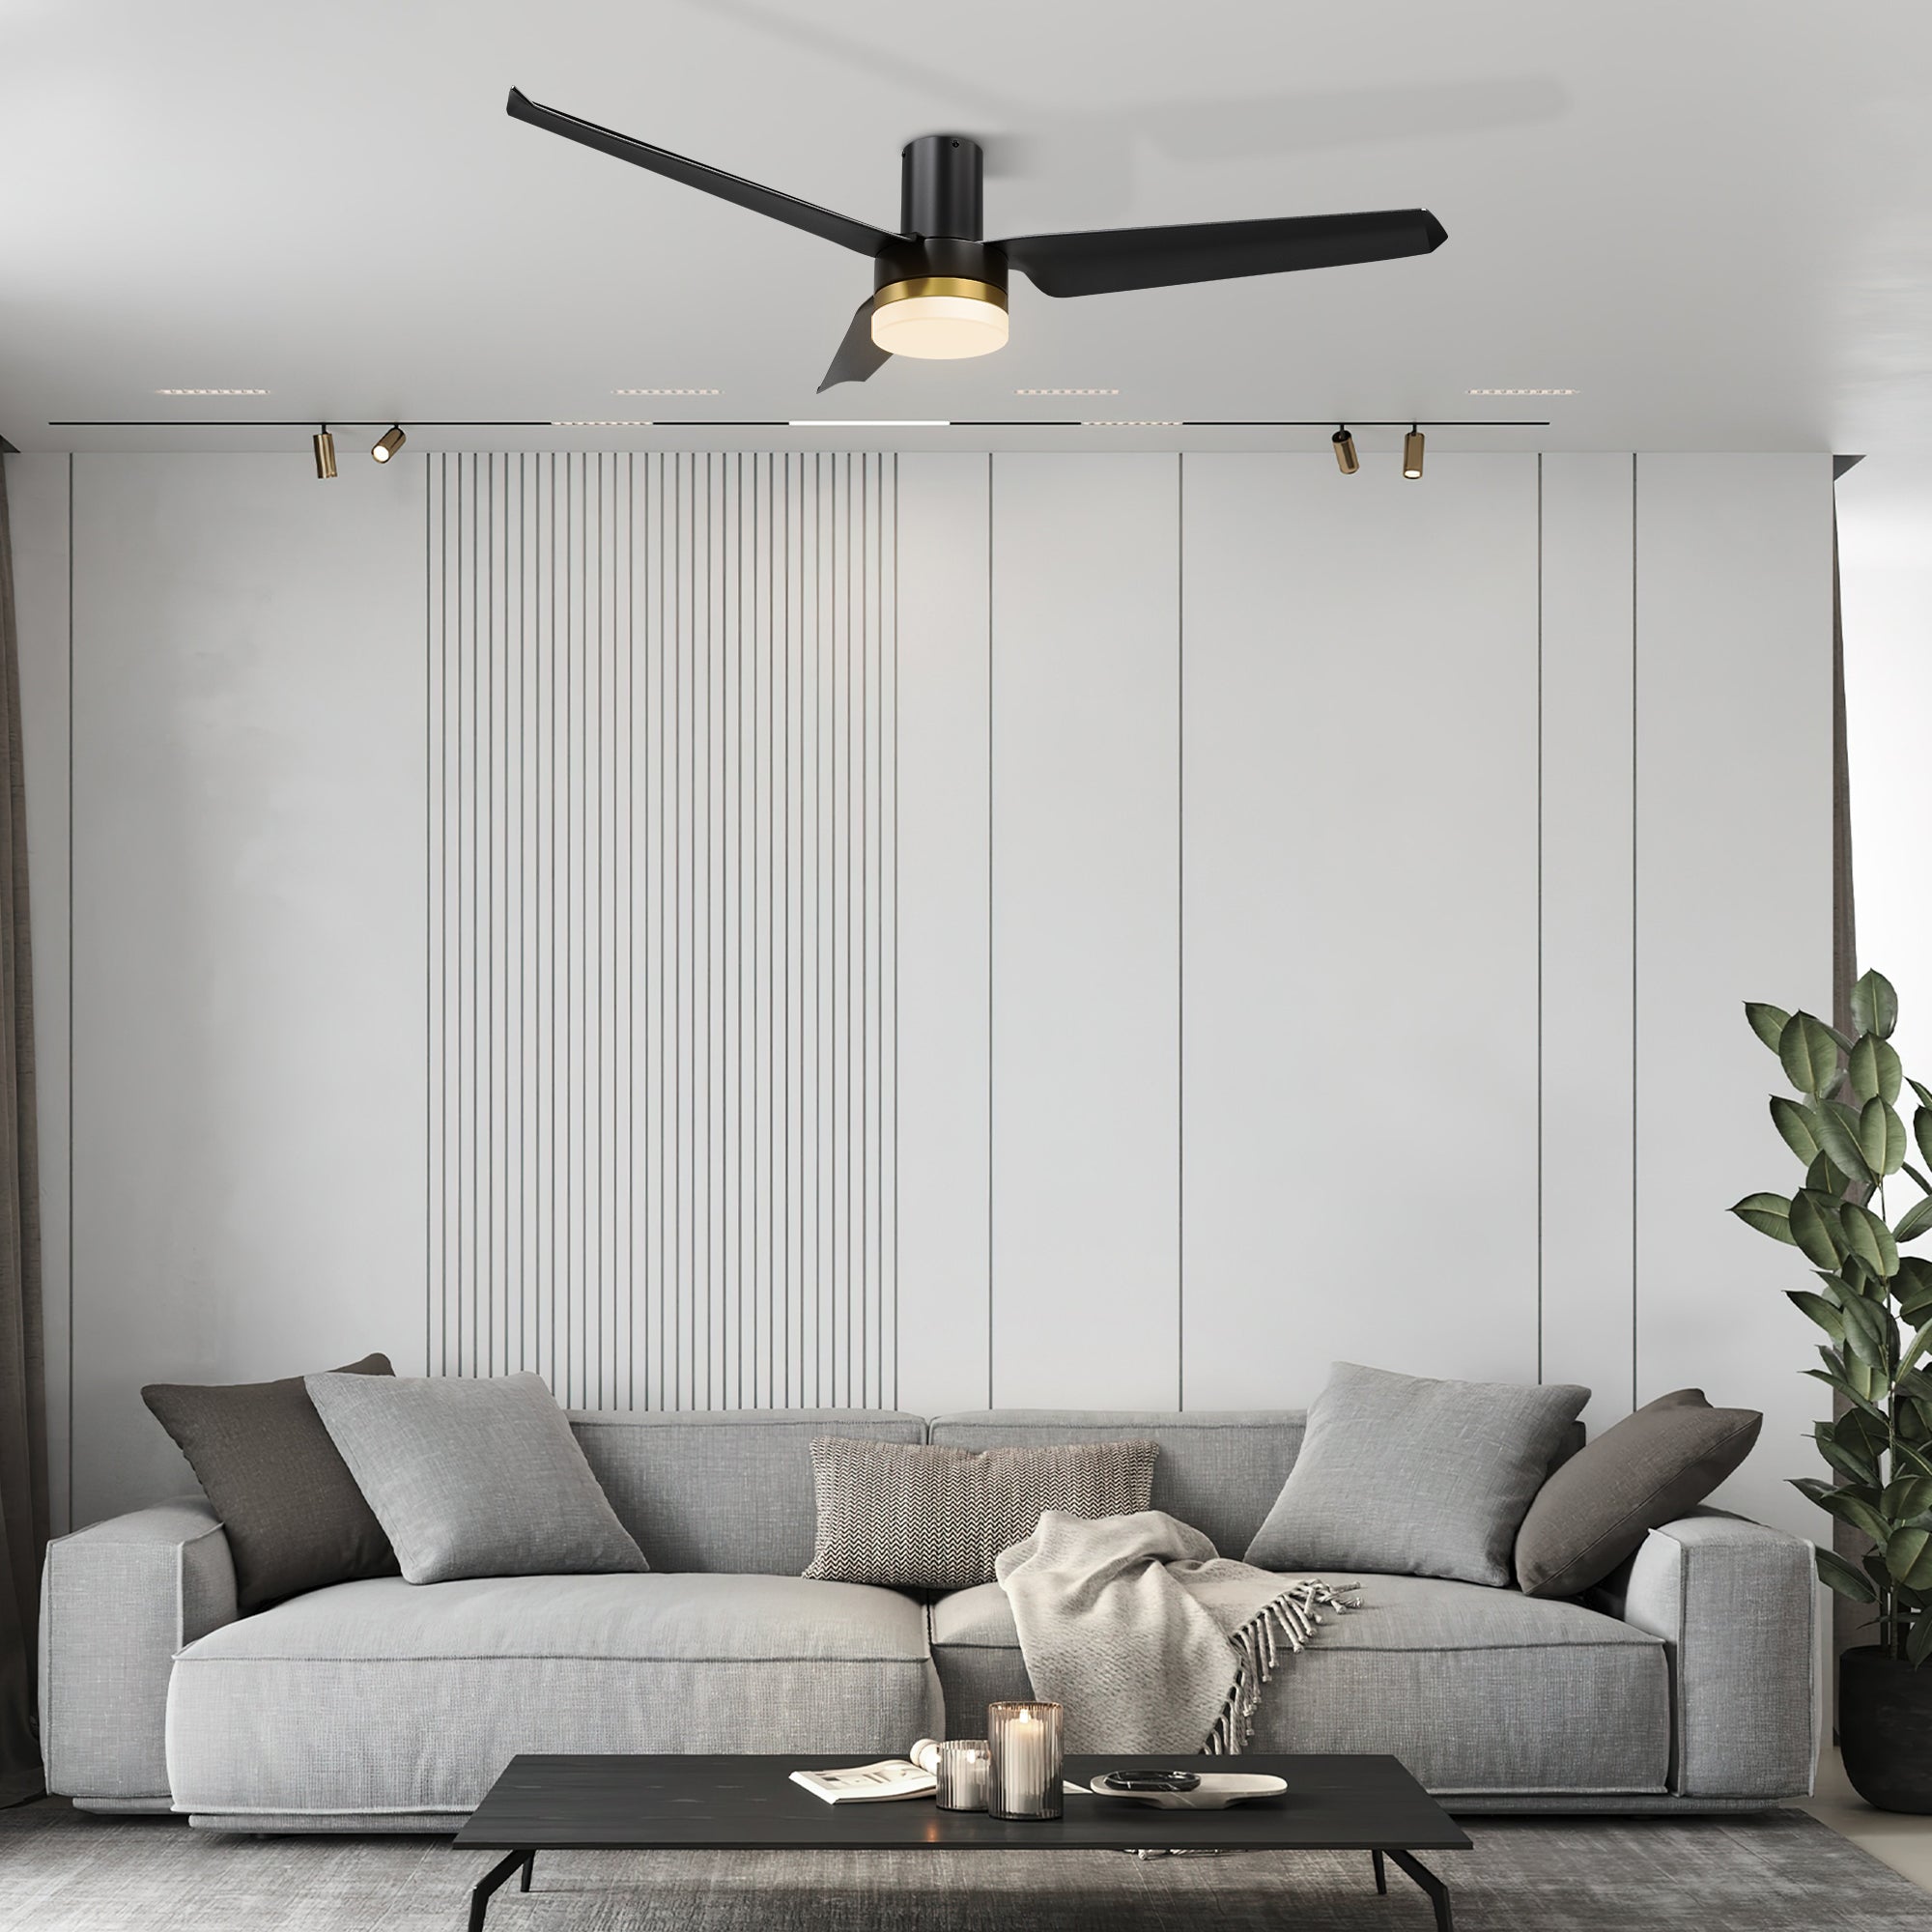 This Topeka 52" smart ceiling fan keeps your space cool, bright, and stylish. It is a soft modern masterpiece perfect for your large indoor living spaces. This Wifi smart ceiling fan is a simplicity designing with Black finish, use very strong ABS blades and has an integrated 4000K LED cool light. The fan features Remote control, Wi-Fi apps, Siri Shortcut and Voice control technology (compatible with Amazon Alexa and Google Home Assistant ) to set fan preferences.